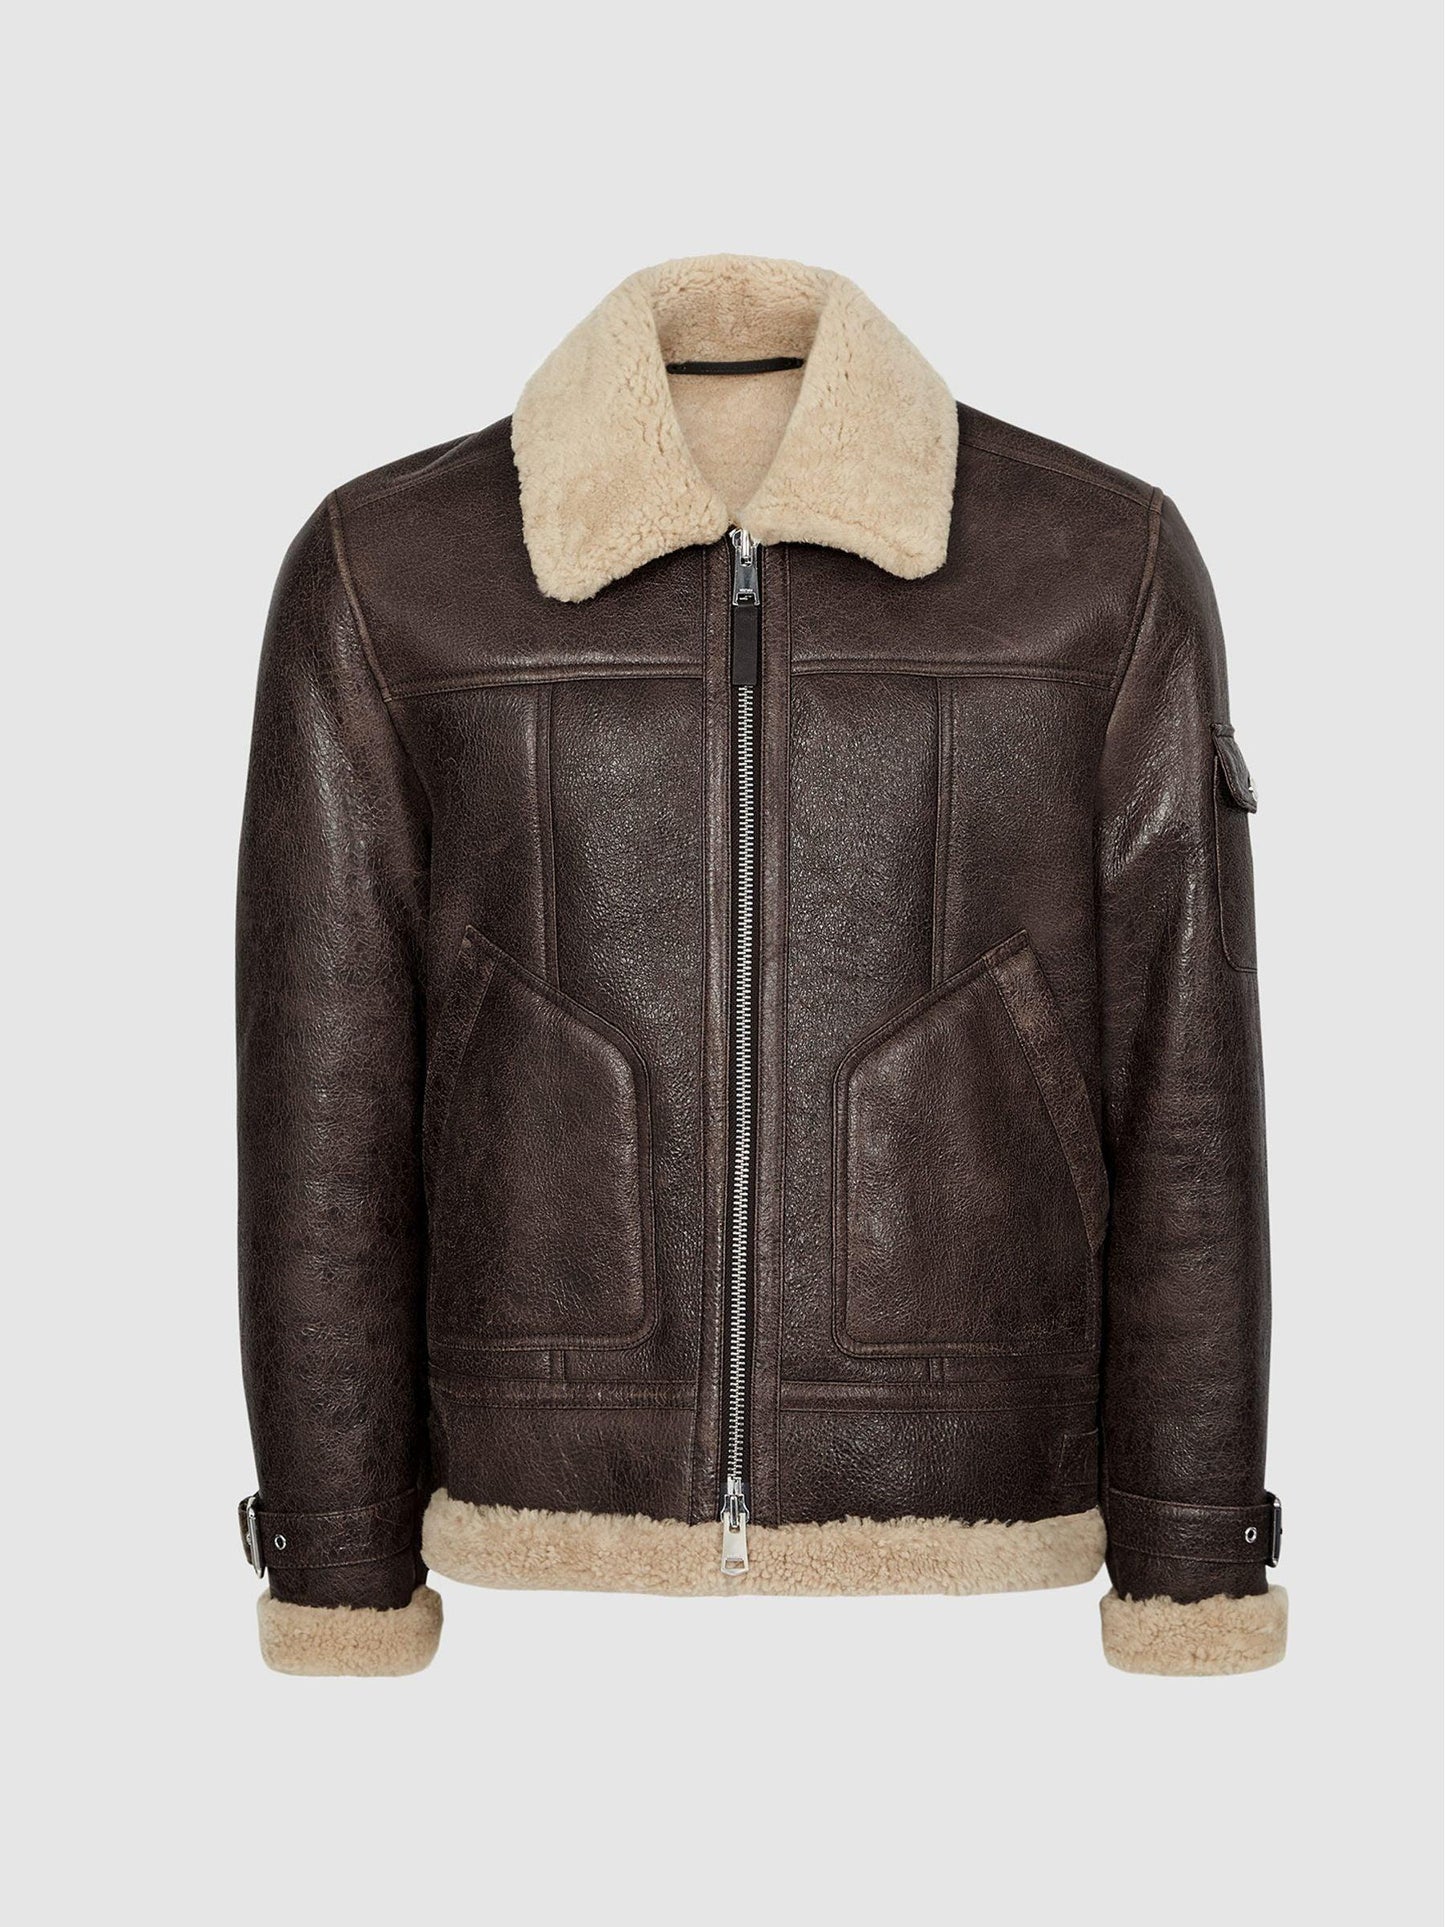 Aviator Brown Leather Jacket with Shearling Collar - Leather Loom